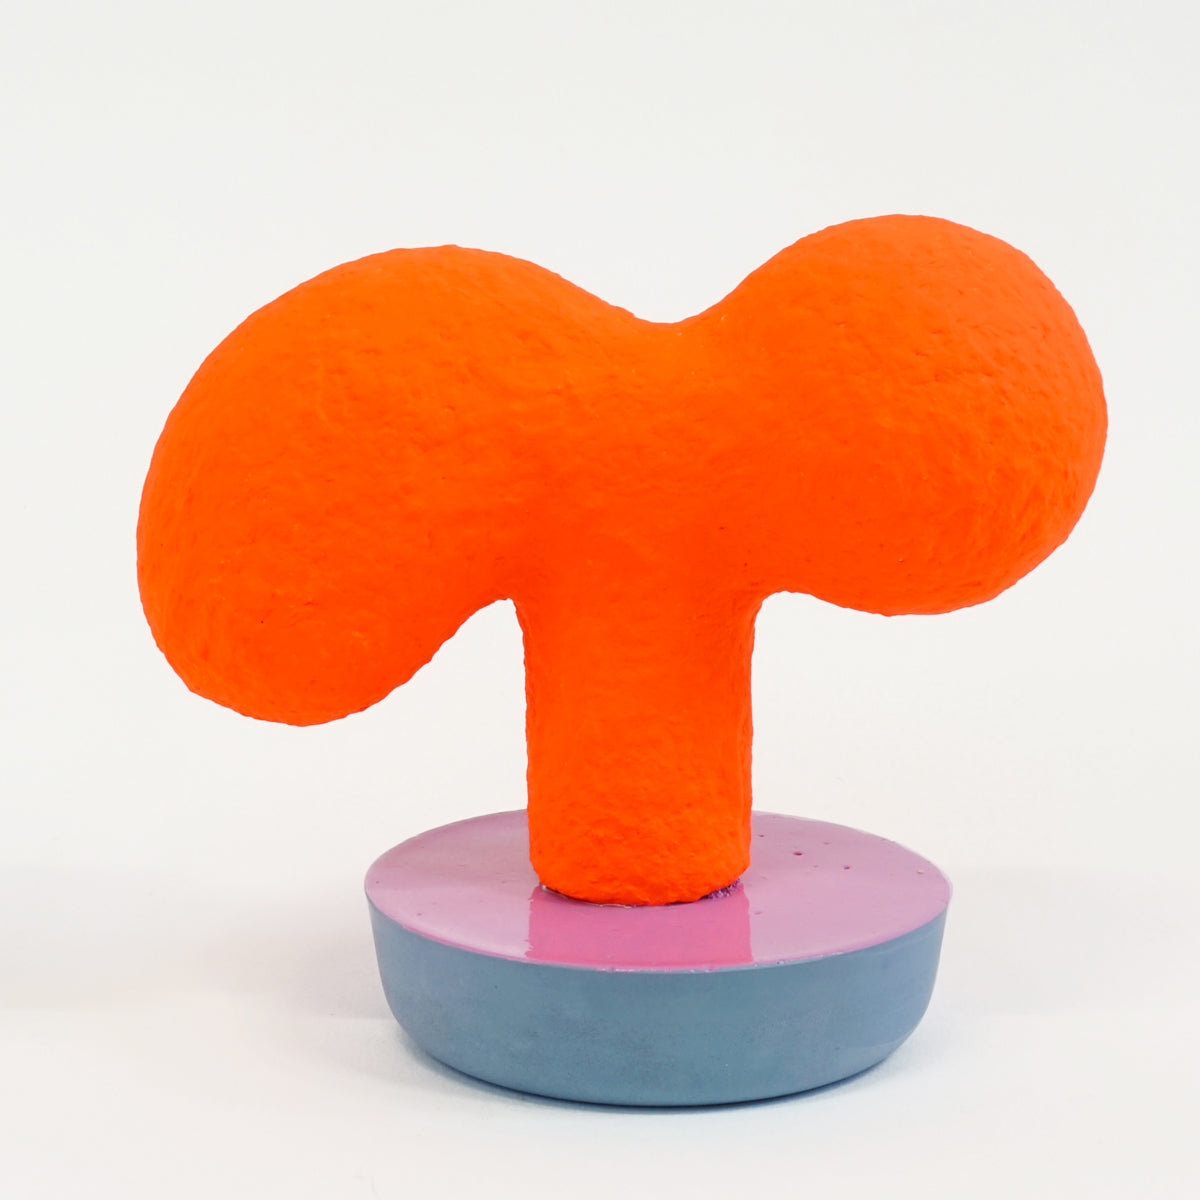 CHIAOZZA abstract biomorphic sculpture - orange on pink and blue base